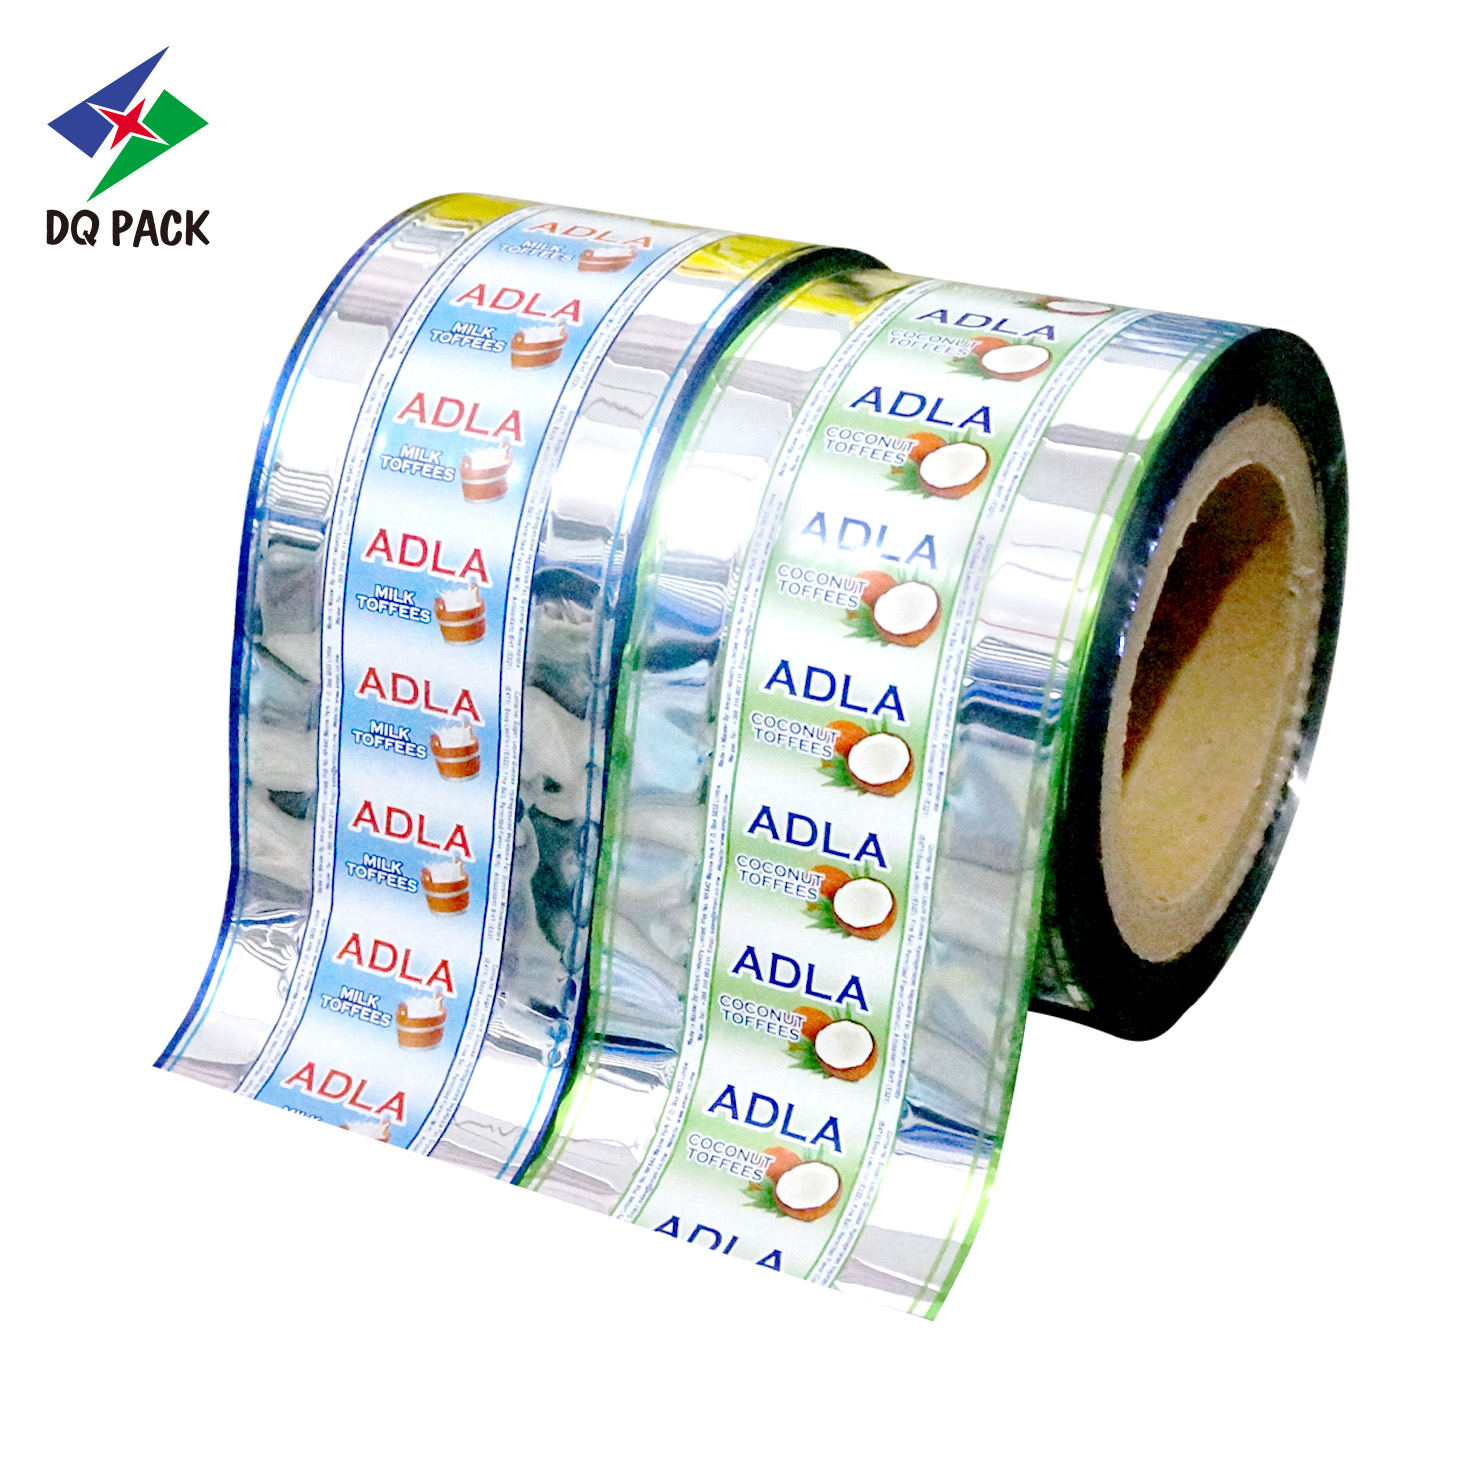 DQ PACK Candy Twist Roll Film Chocolate Pet Roll Stock Film